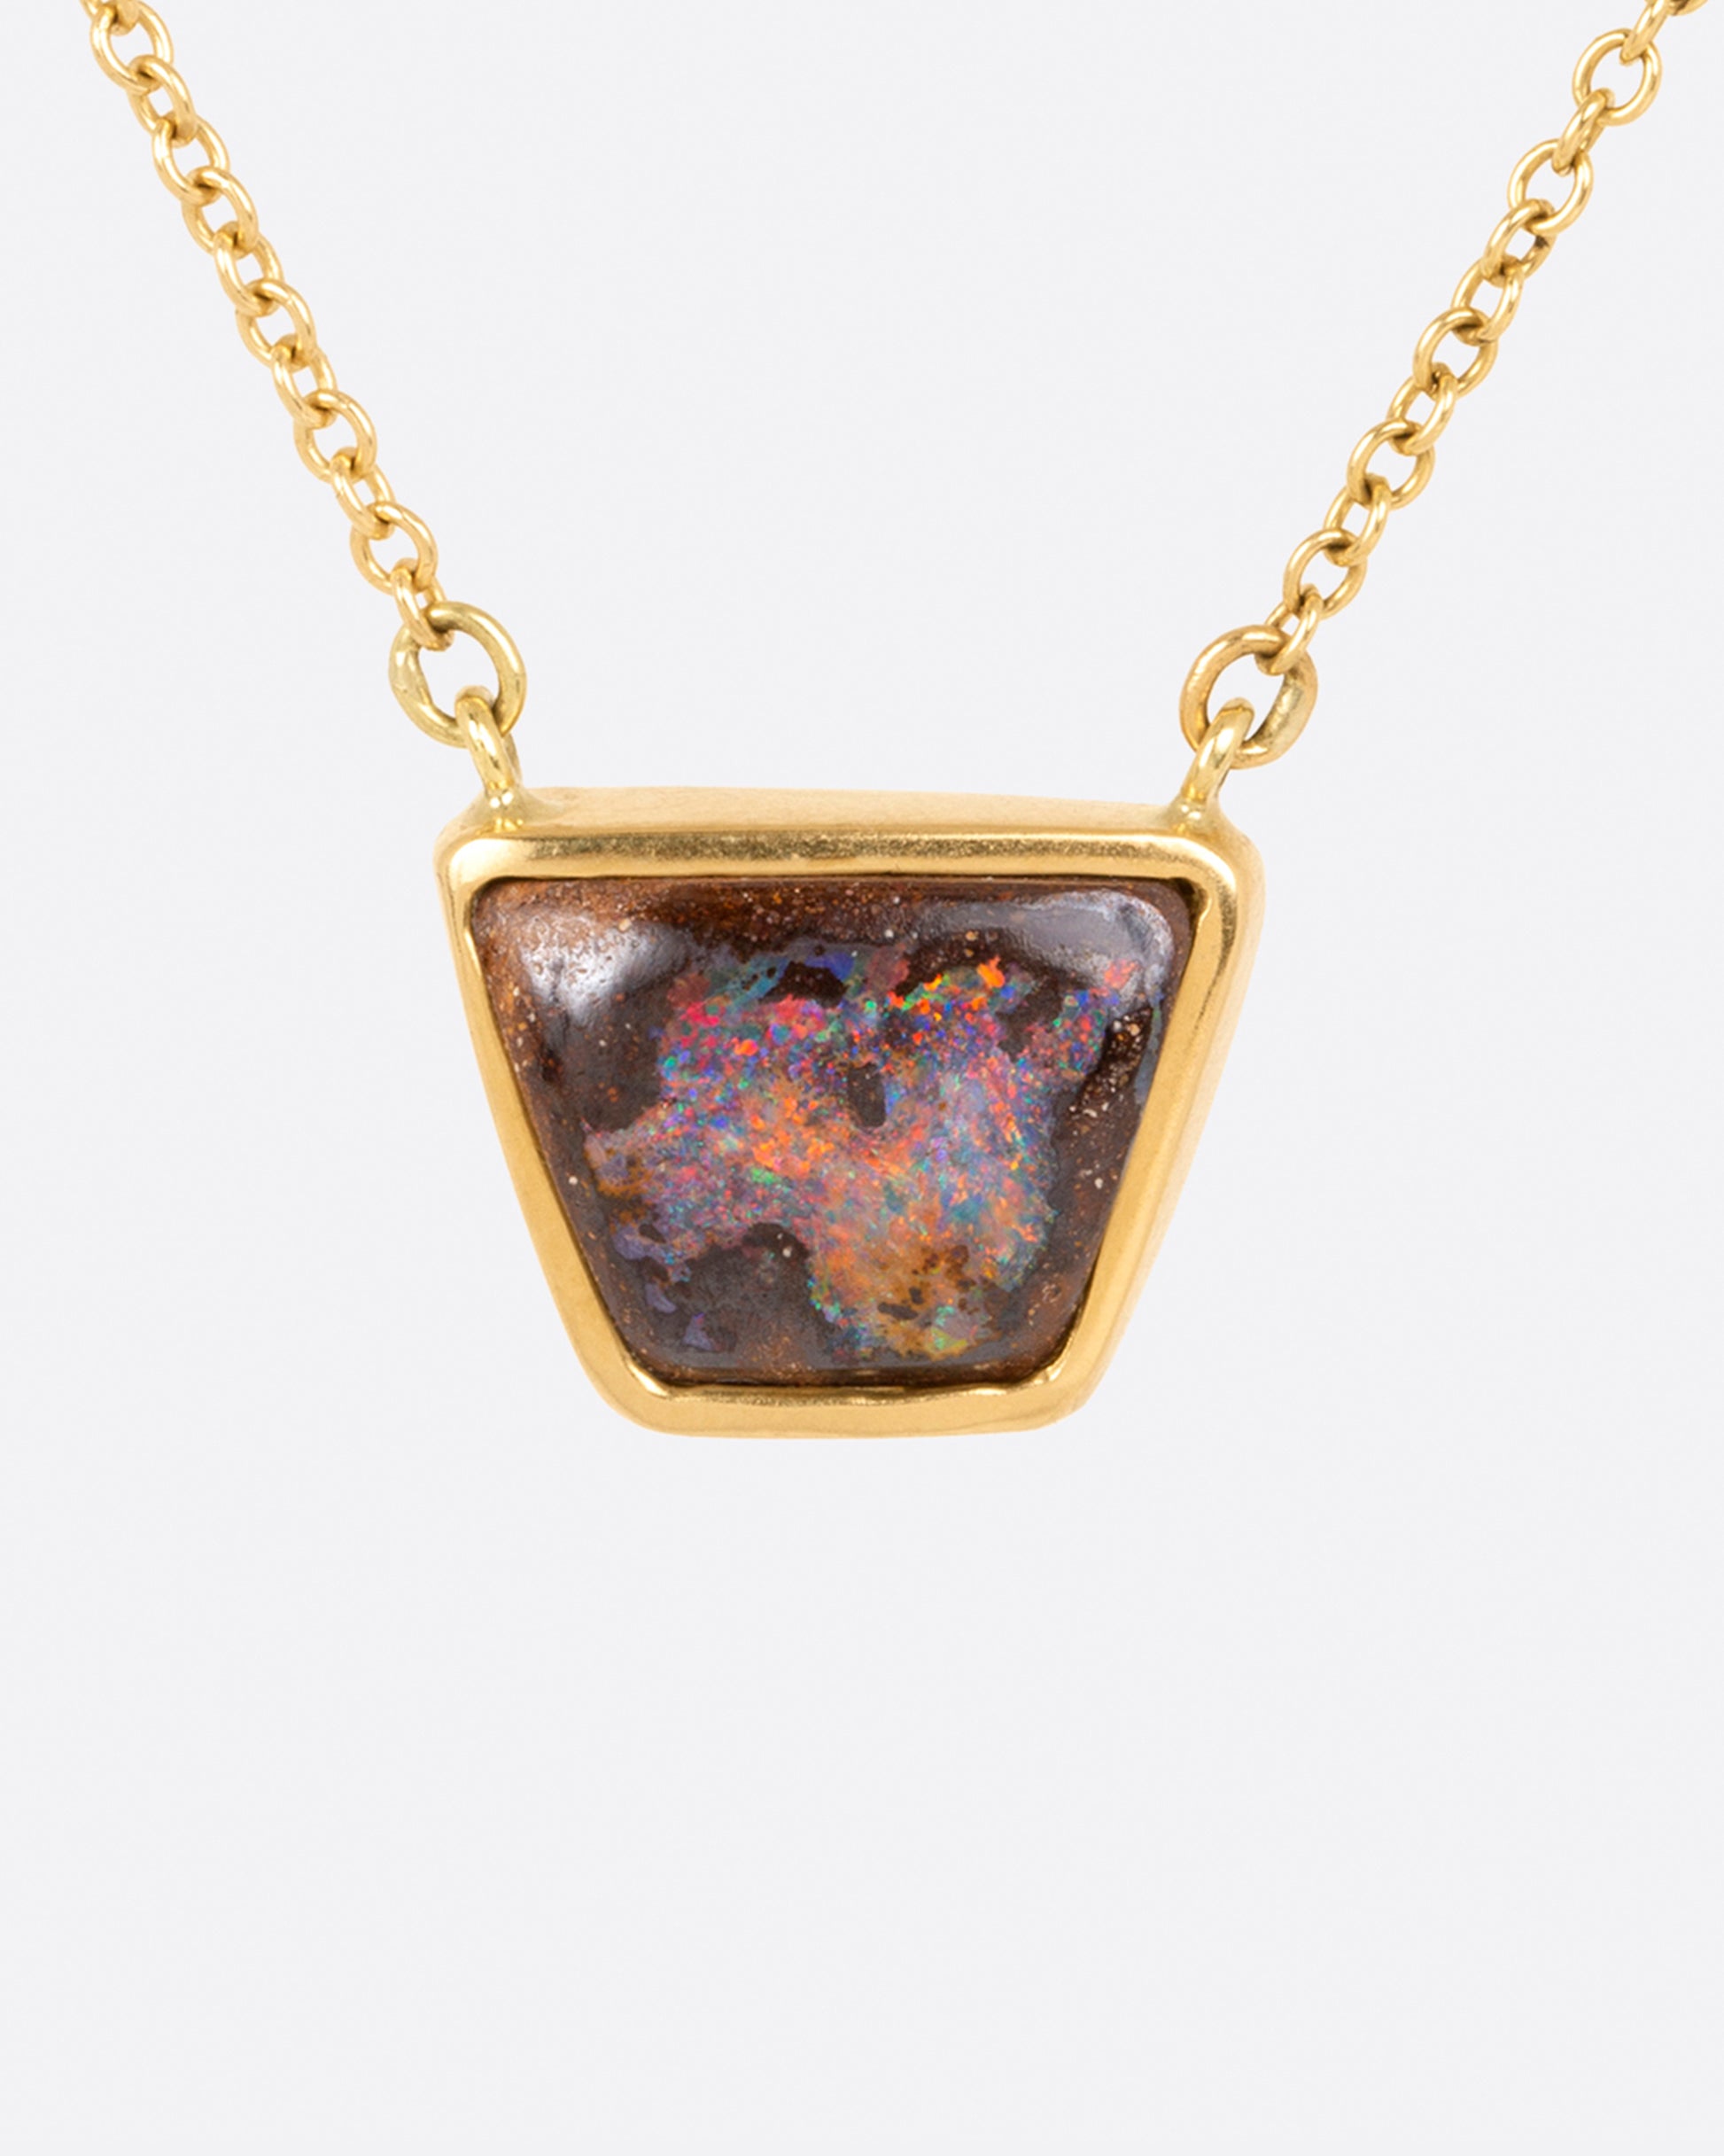 A flashy opalized wood is set in a simple bezel setting so the stone remains the star of this necklace.